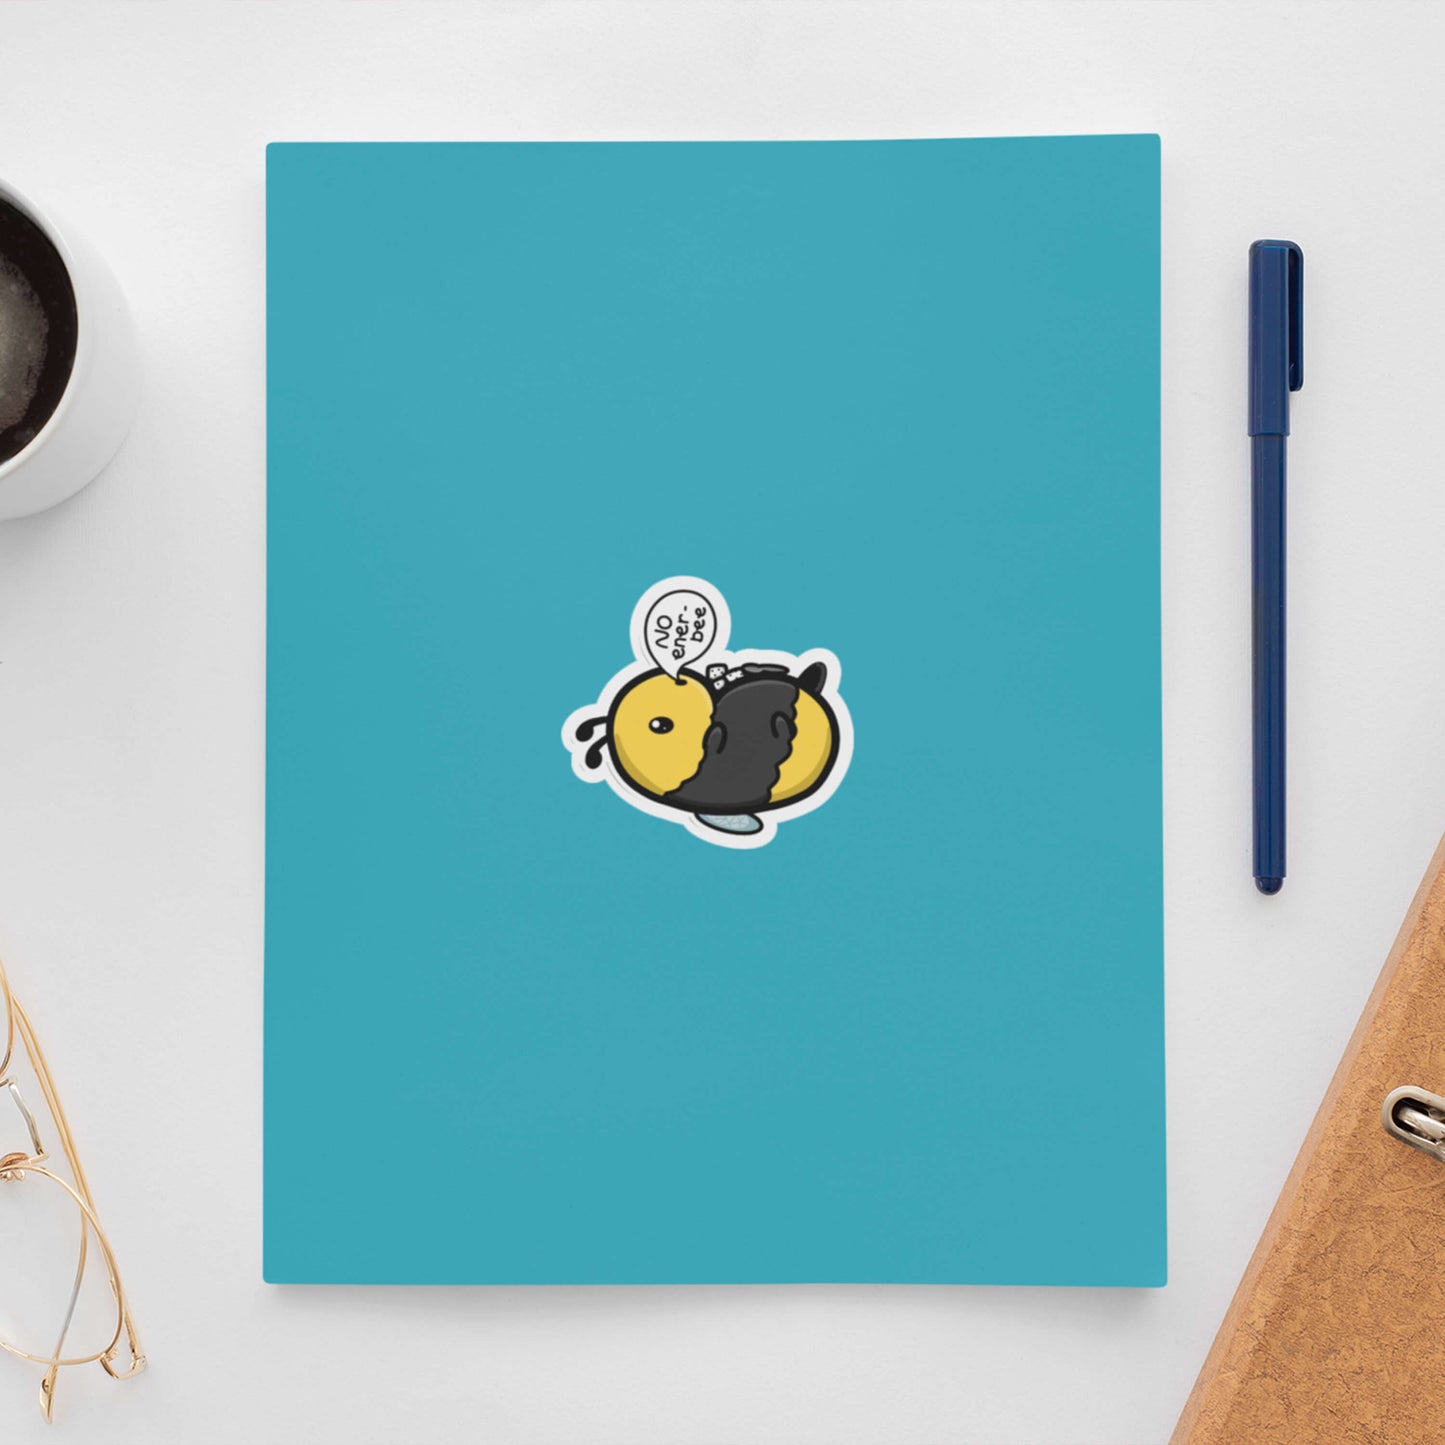 The Low Energy Bee Sticker on a blue notebook cover with a blue pen and brown folder to the right and a black coffee and gold glasses to the left. The bumble bee shaped vinyl sticker is laying on its back with sugar cubes and a spoon on its belly with a speech bubble reading 'no ener-bee'. The hand drawn design is raising awareness for chronic fatigue.